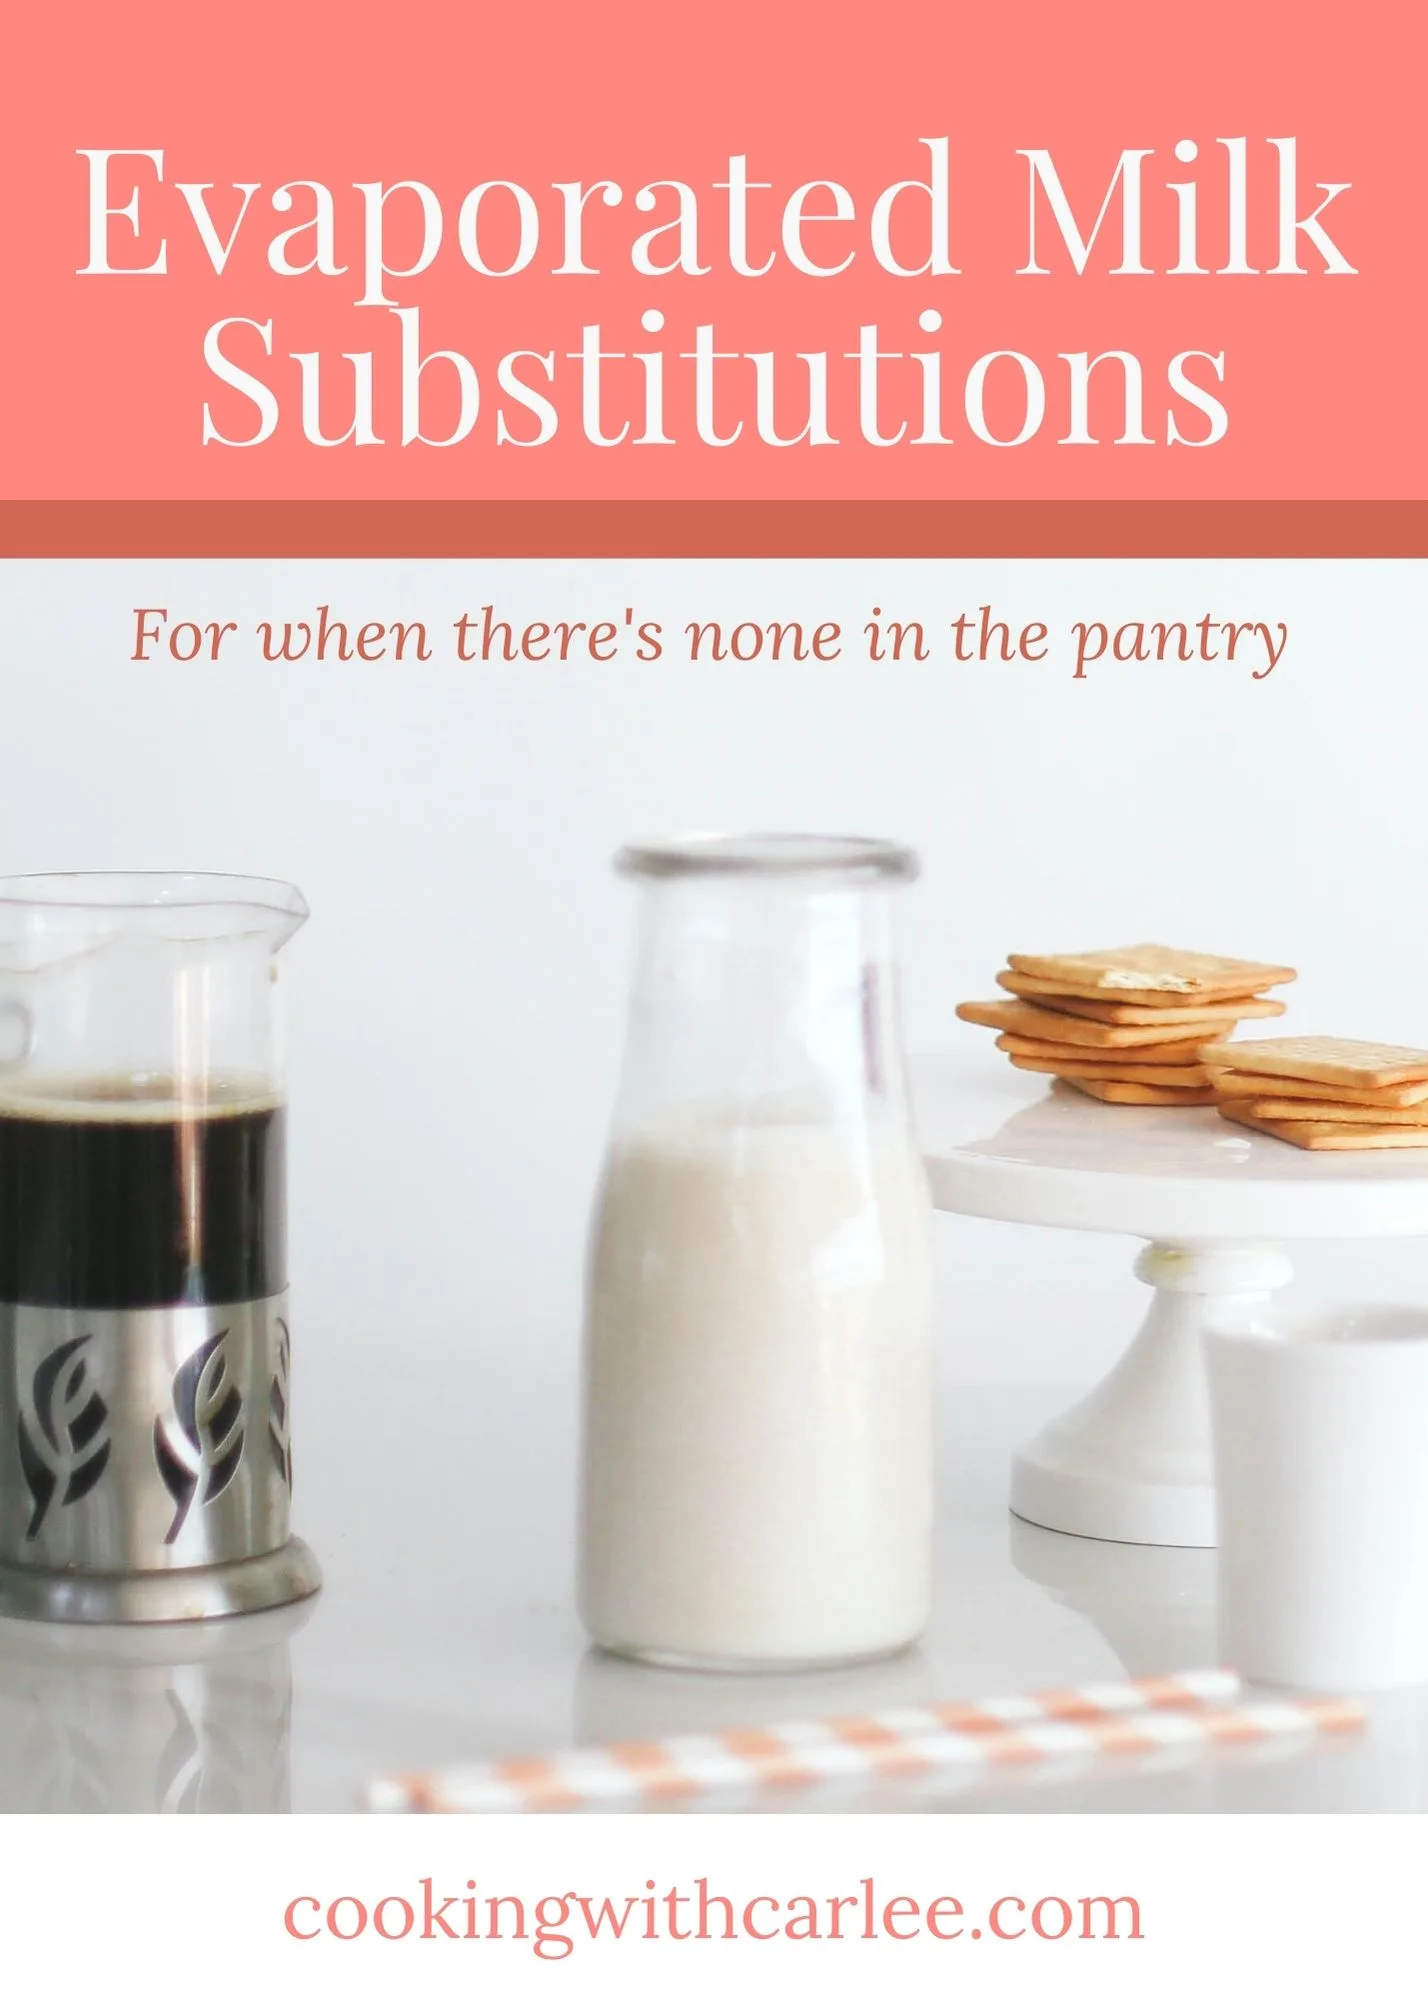 Have you ever picked a recipe that called for evaporated milk but you didn't have any in the pantry? Don't despair! Here are some great substitutions for evaporated milk. 